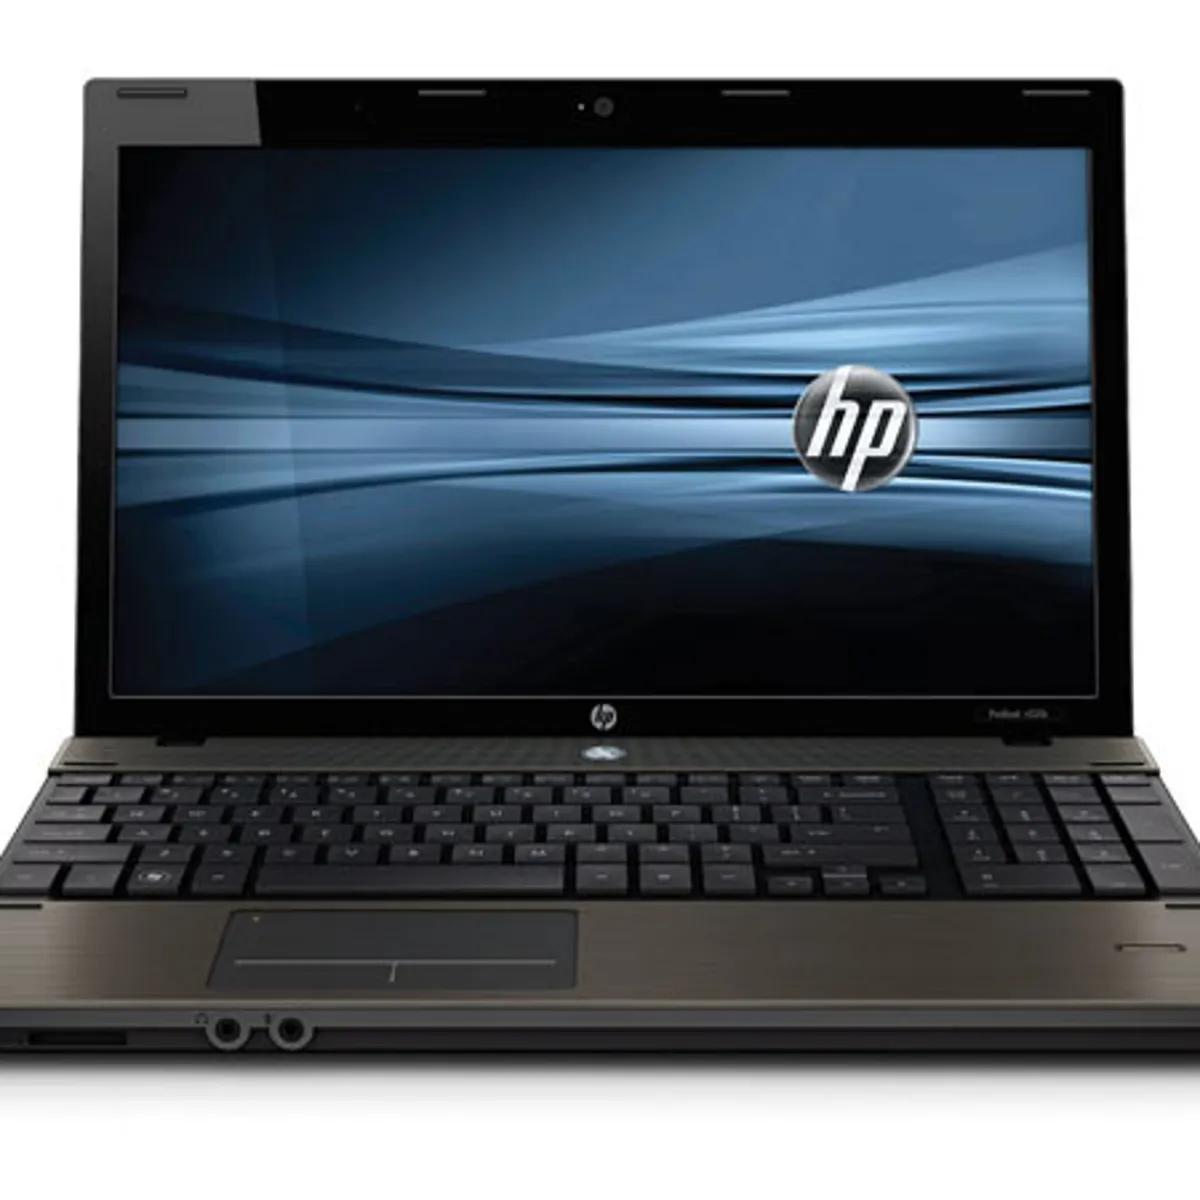 Hp probook 4520s specs: reliable laptop with powerful performance